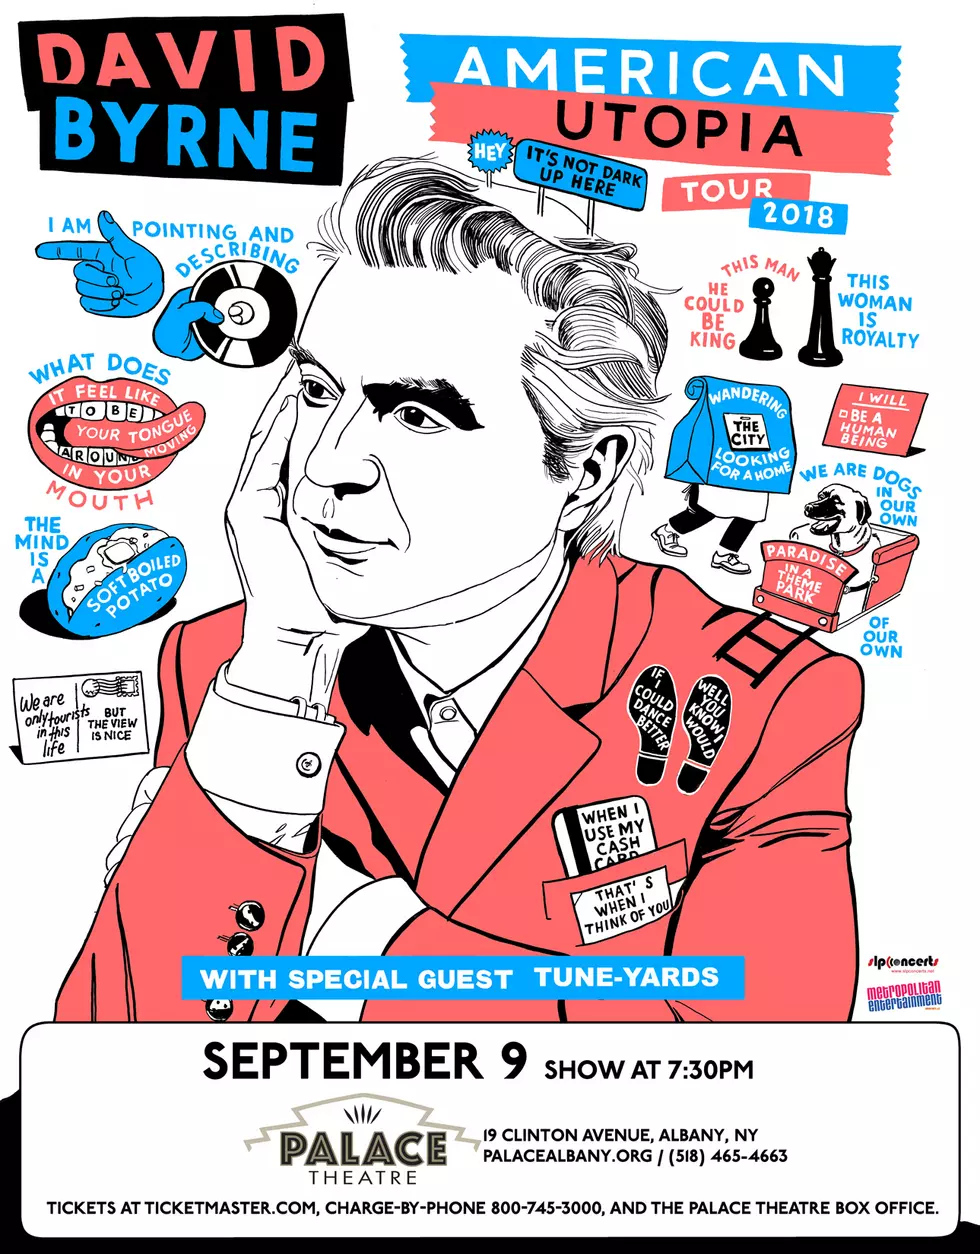 David Byrne to Play the Palace Theatre in Albany